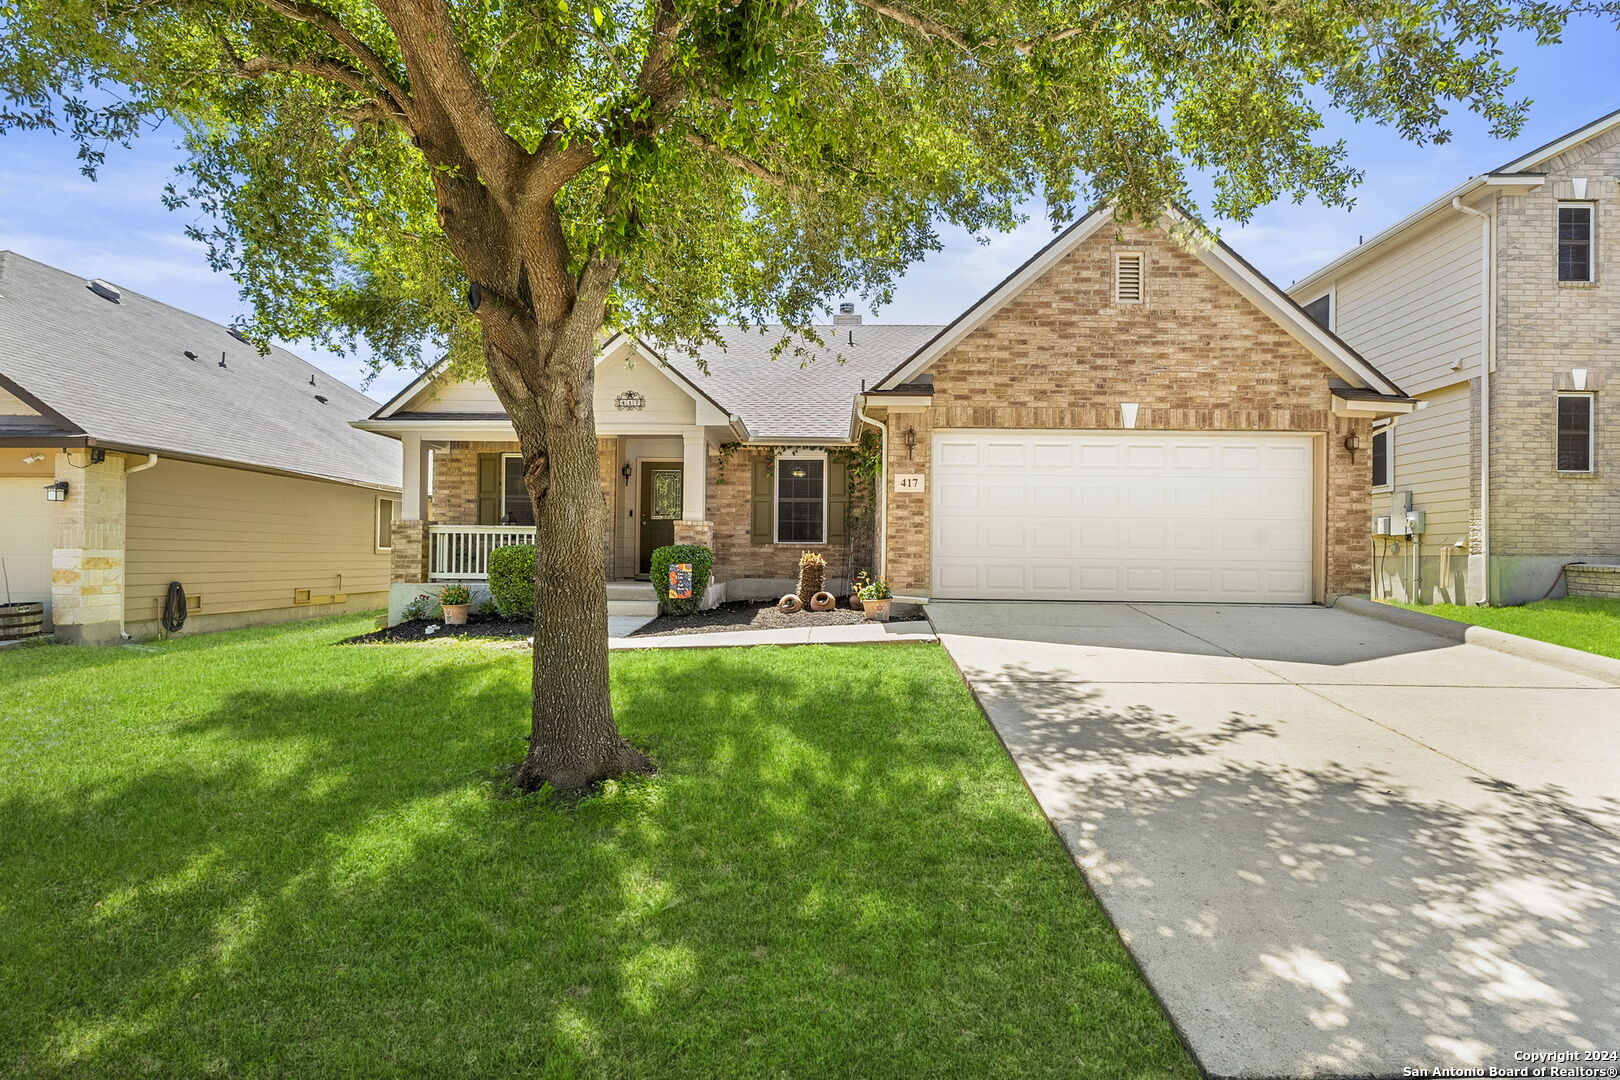 Photo of 417 Turnberry Wy in Cibolo, TX